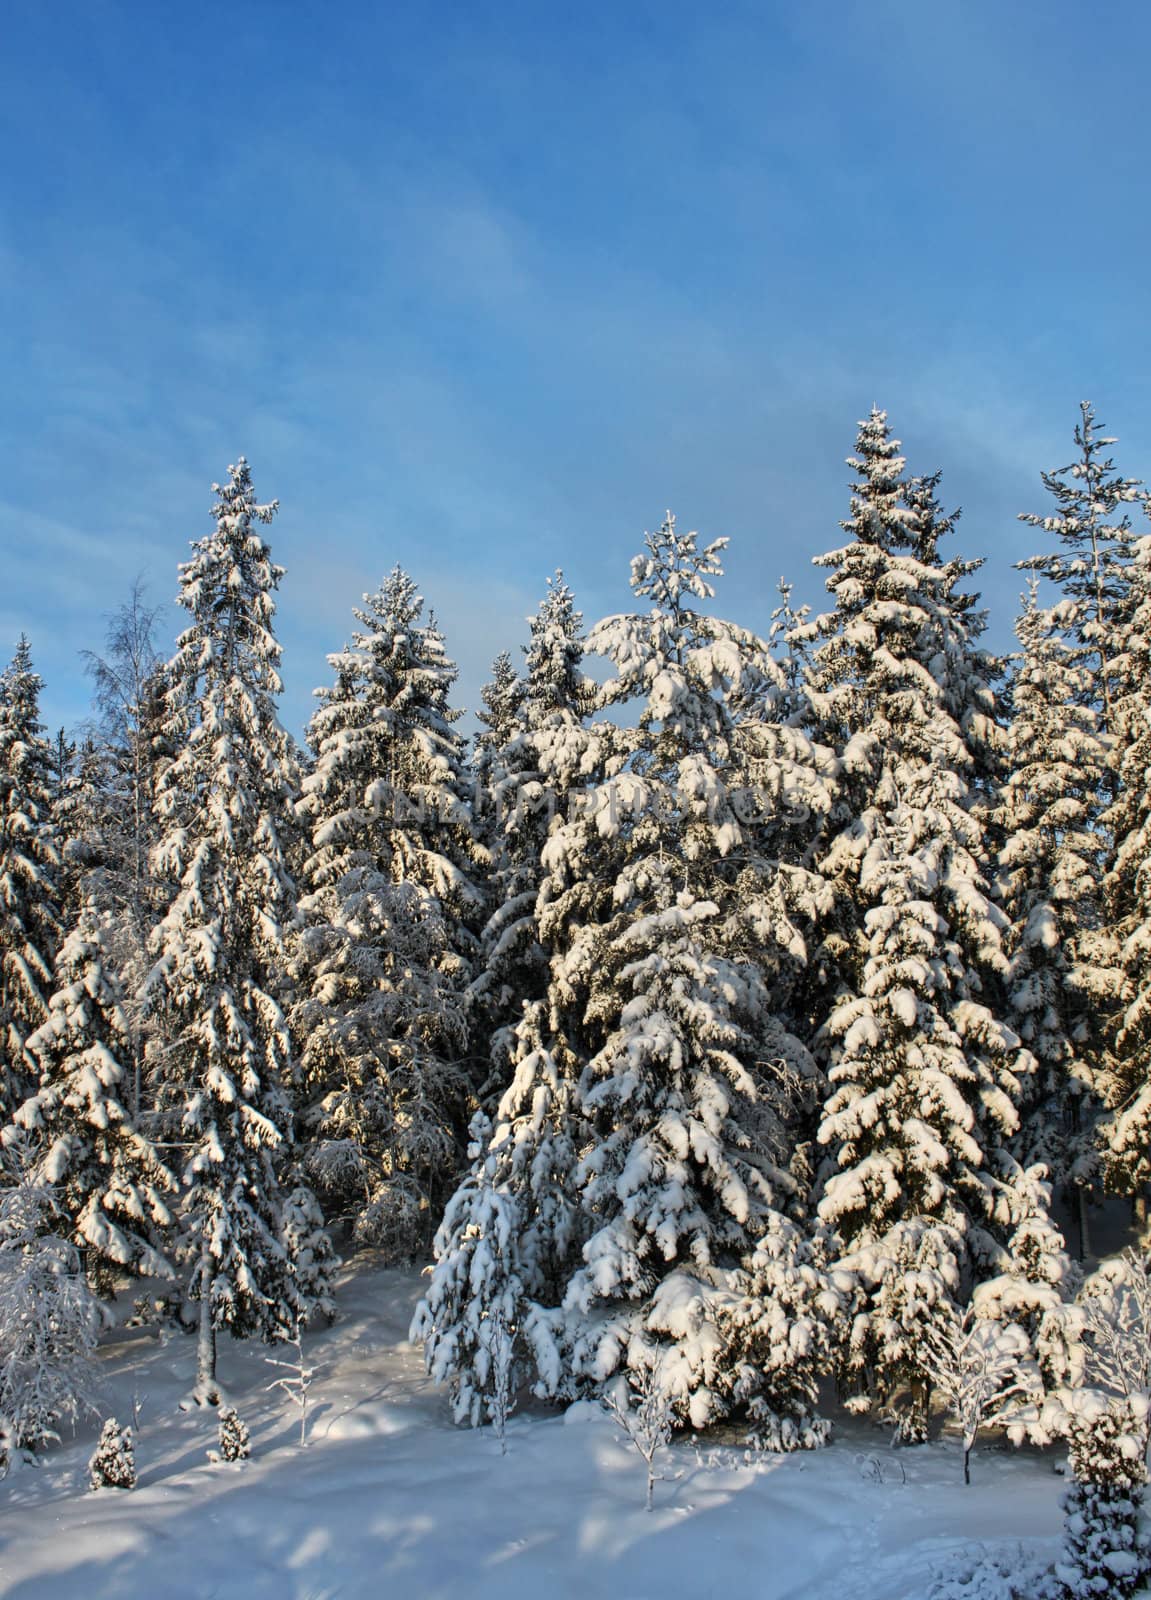 Snowy winter forest trees scenery blue sky background